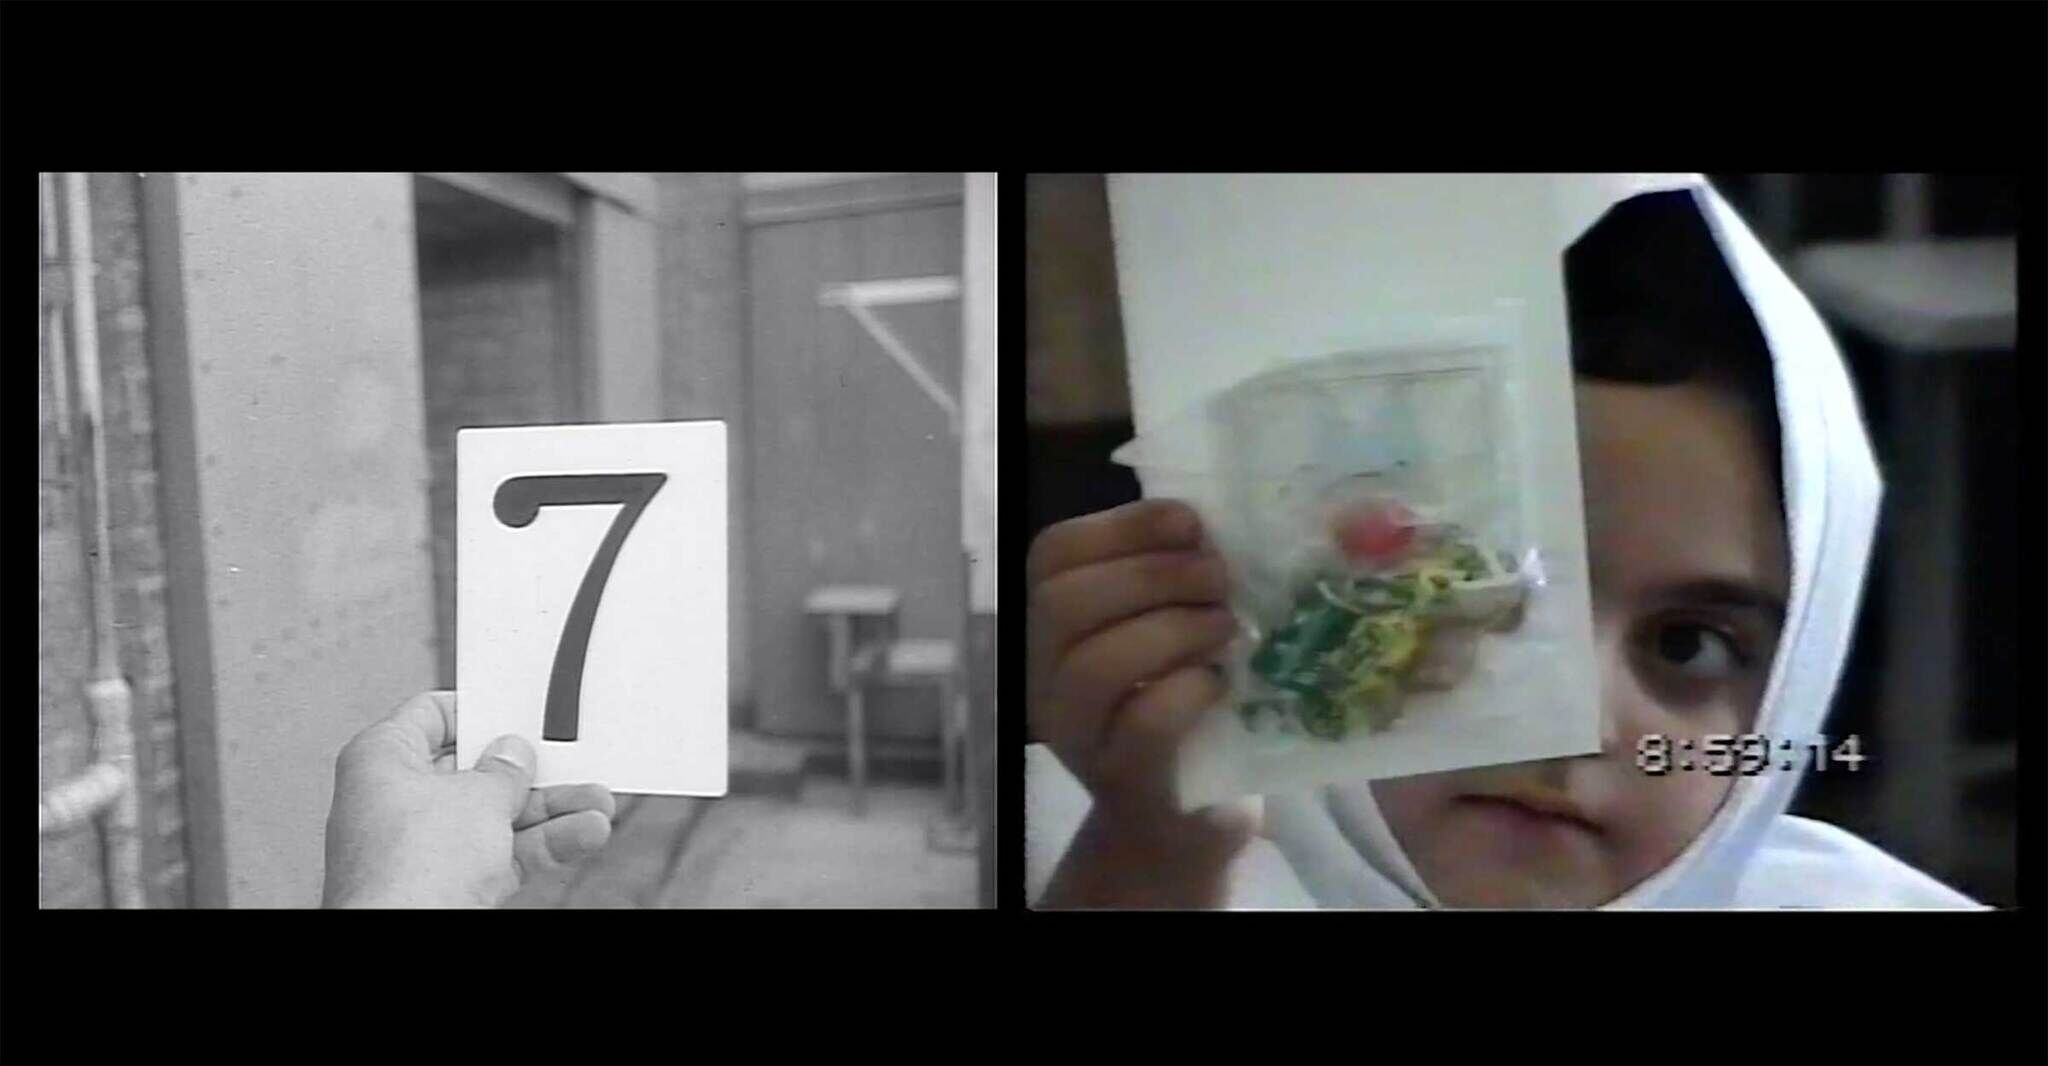 Split screen with a hand holding a number 7 card on the left and a child in a hood showing a bag with colorful contents on the right.